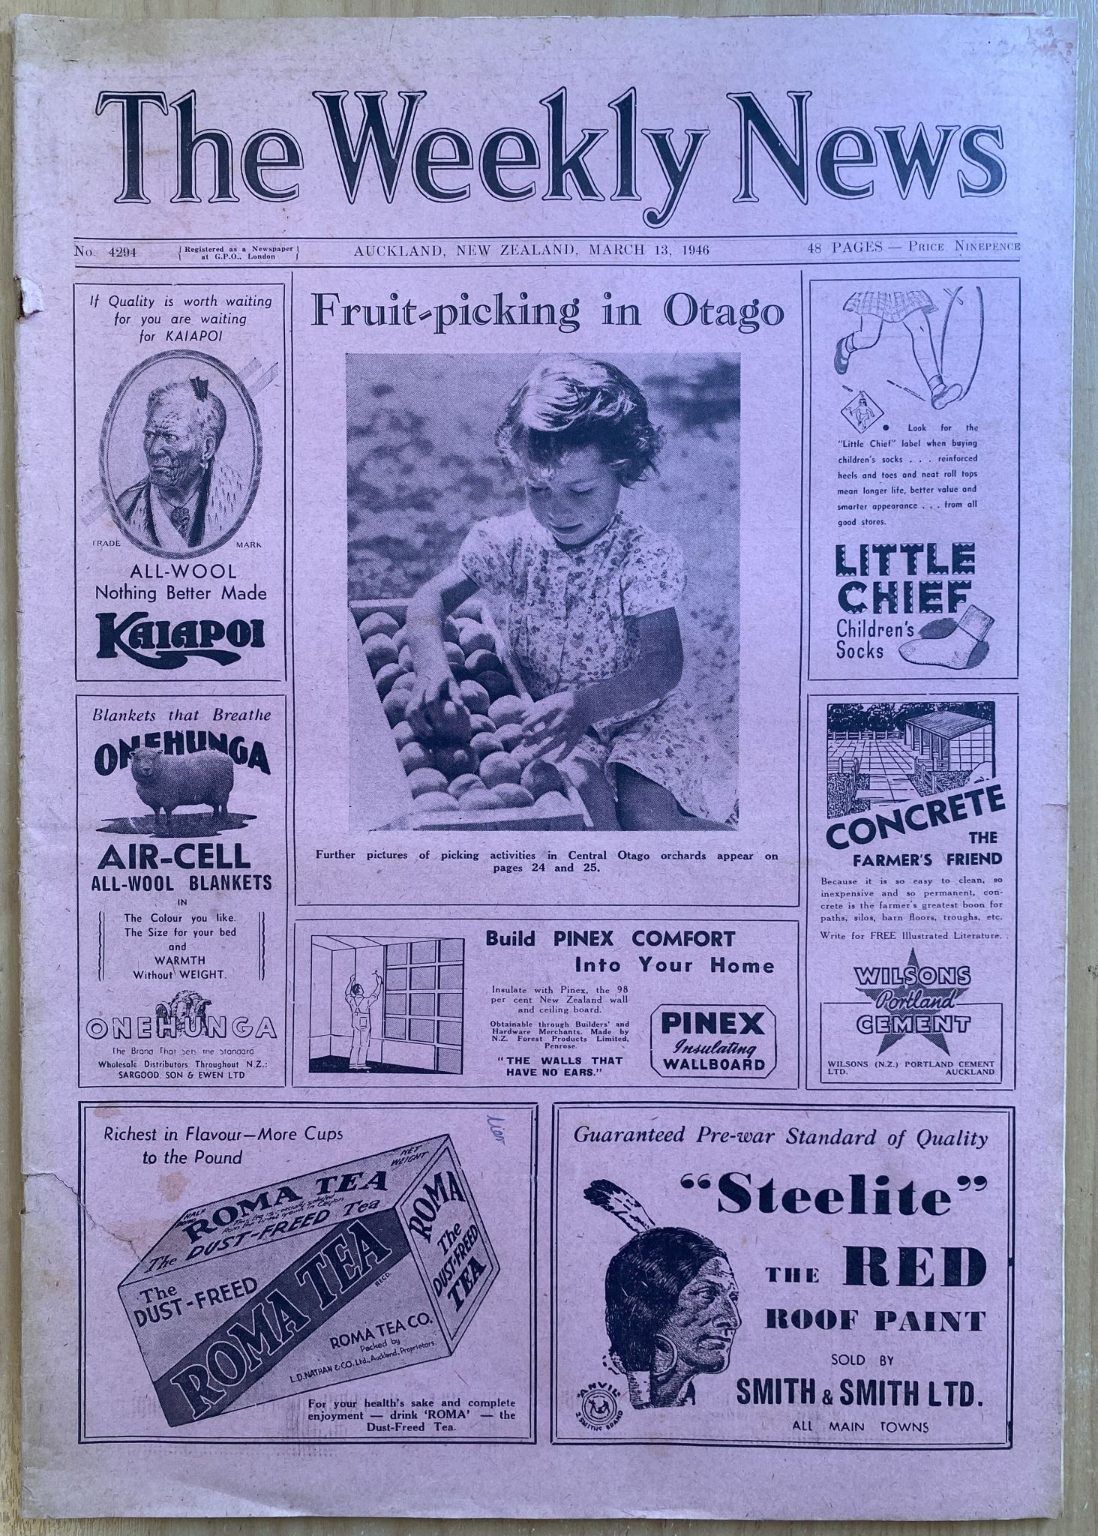 OLD NEWSPAPER: The Weekly News - No. 4294, 13 March 1946